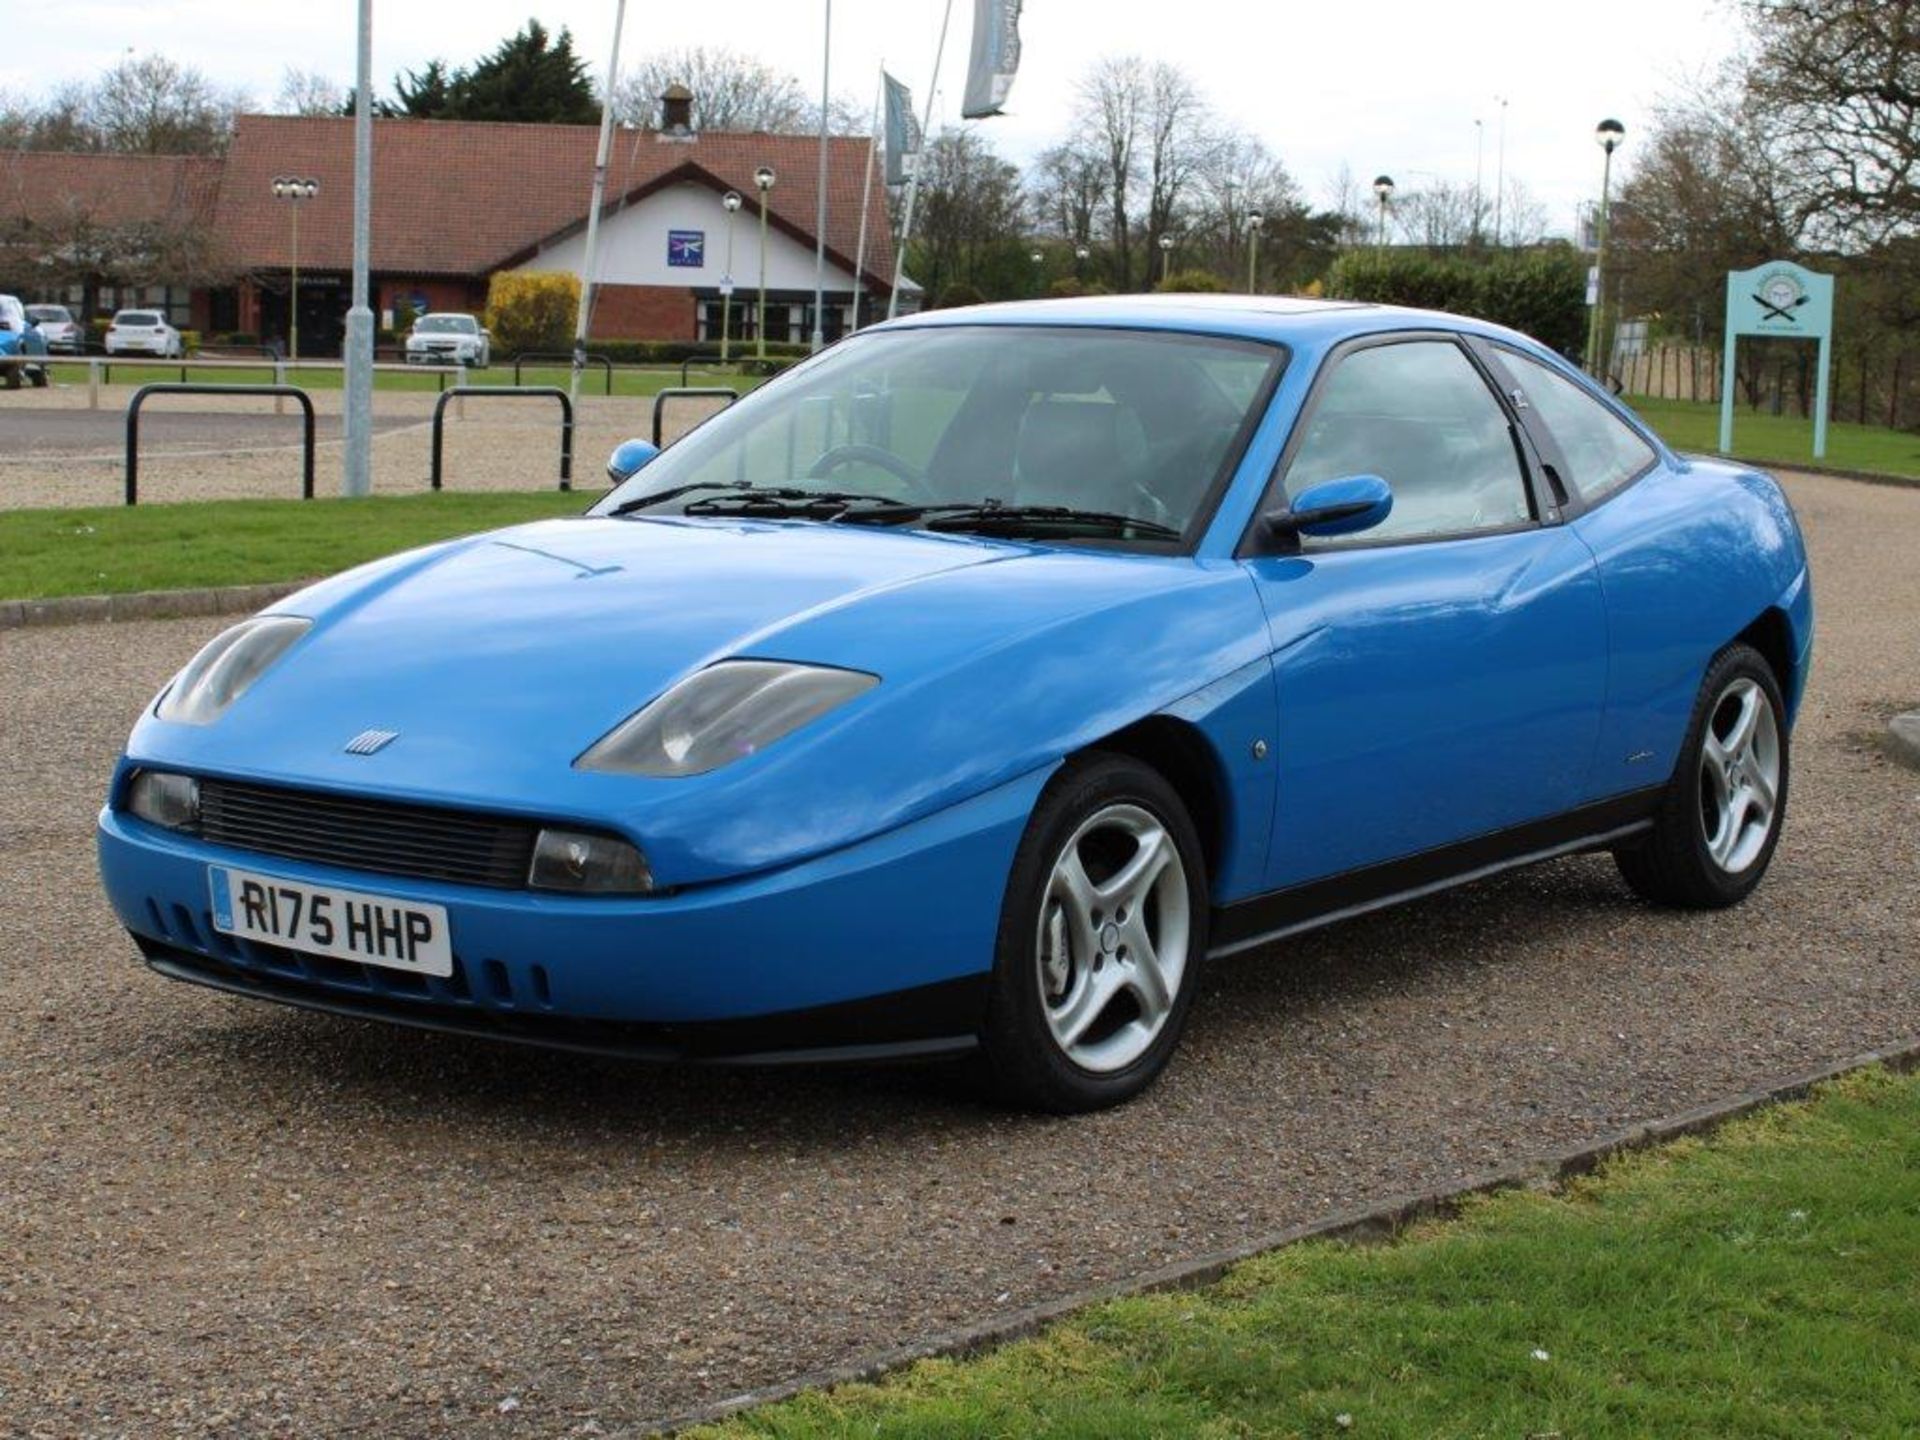 1997 Fiat Coupe 20V Turbo - Image 2 of 13